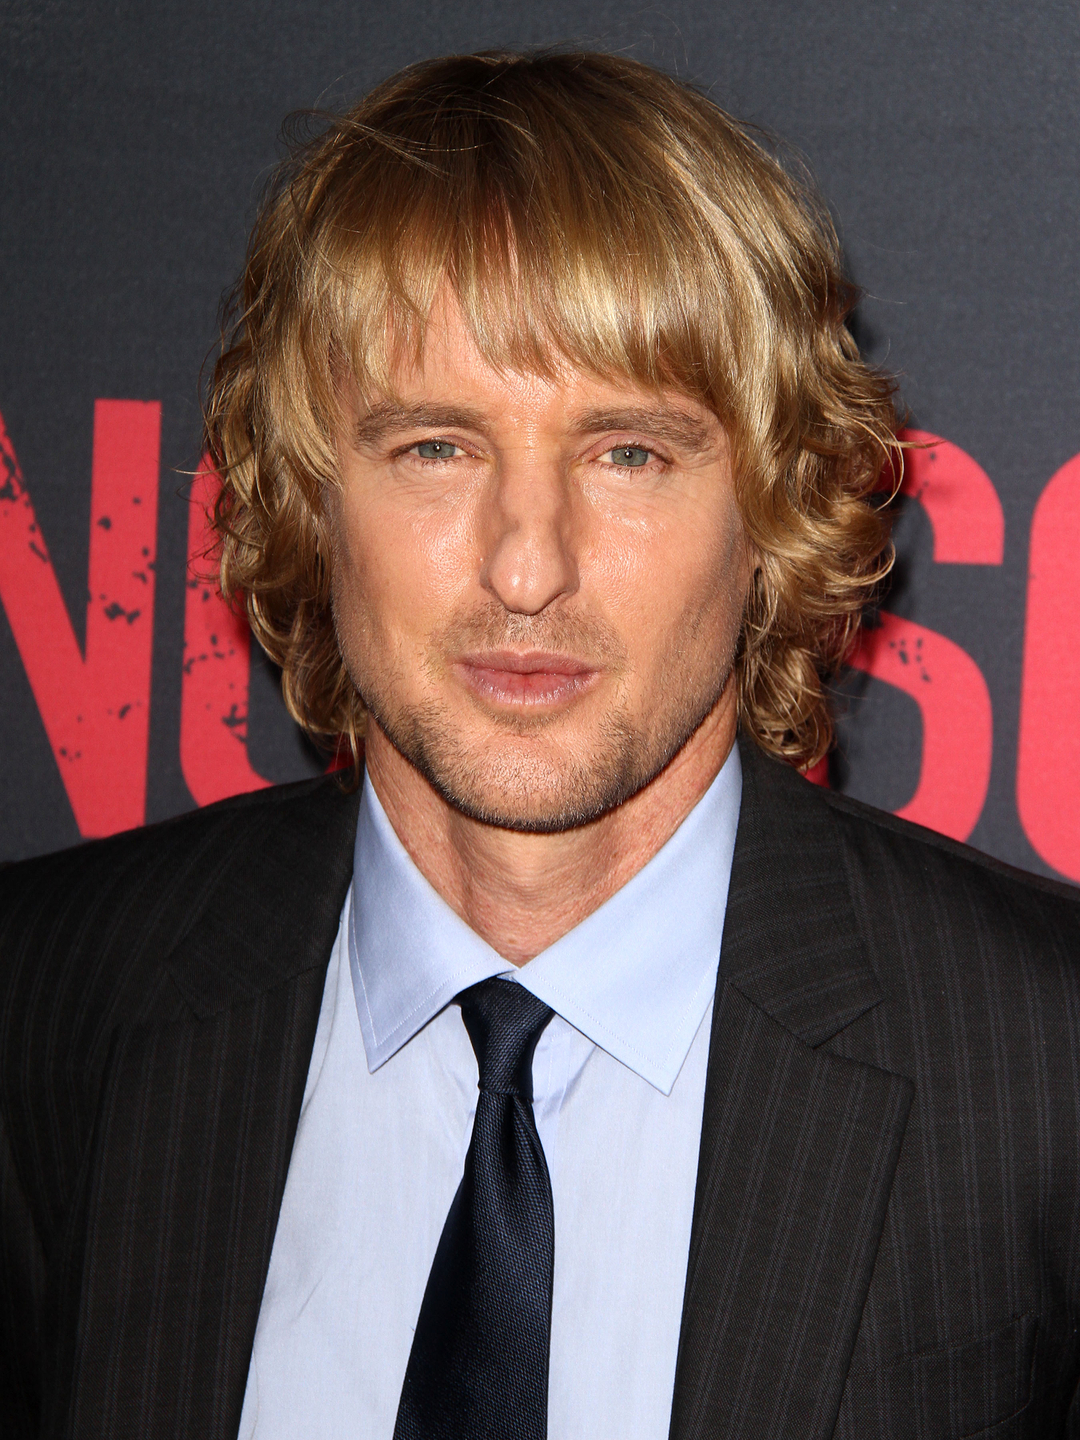 Owen Wilson who are his parents